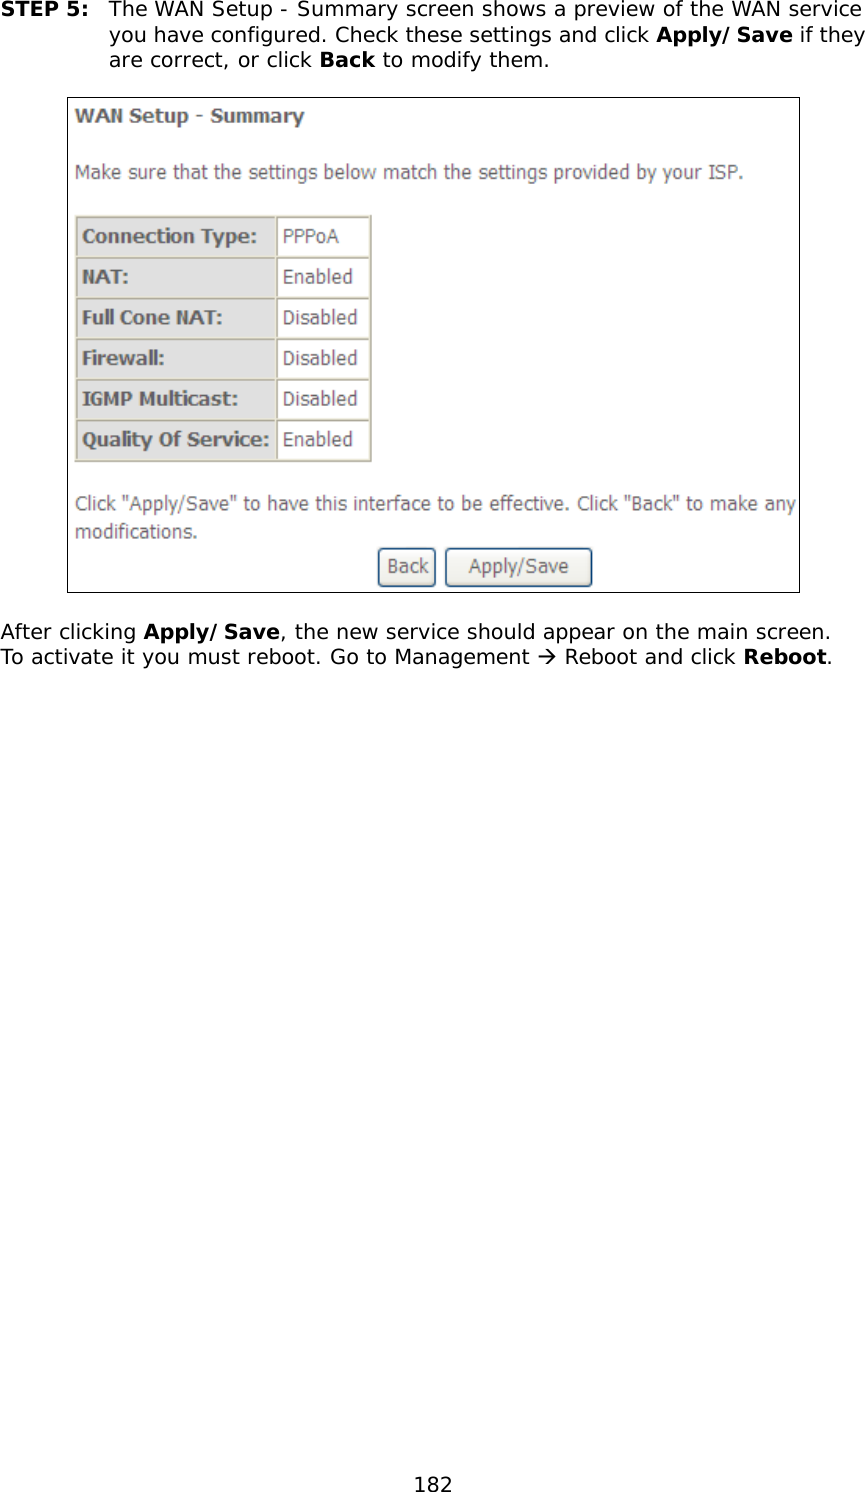  182 STEP 5:  The WAN Setup - Summary screen shows a preview of the WAN service you have configured. Check these settings and click Apply/Save if they are correct, or click Back to modify them.    After clicking Apply/Save, the new service should appear on the main screen.  To activate it you must reboot. Go to Management  Reboot and click Reboot. 